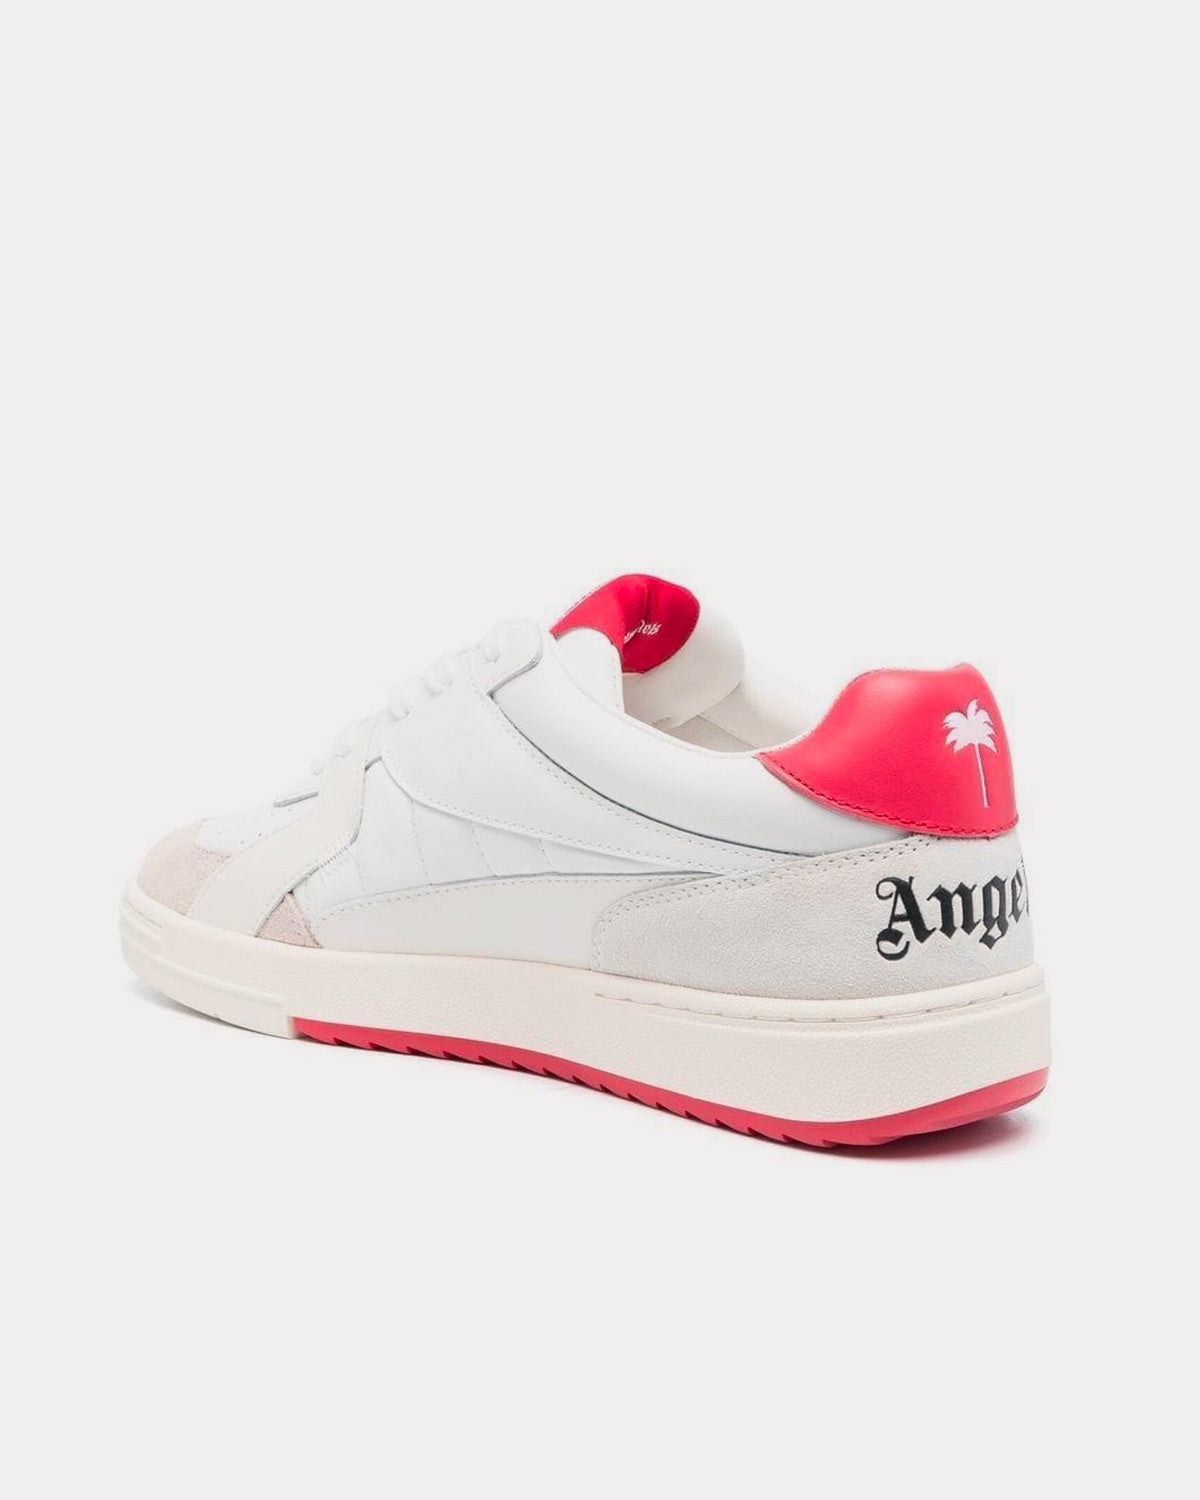 Palm Angels - University White / Fuchsia Low Top Sneakers